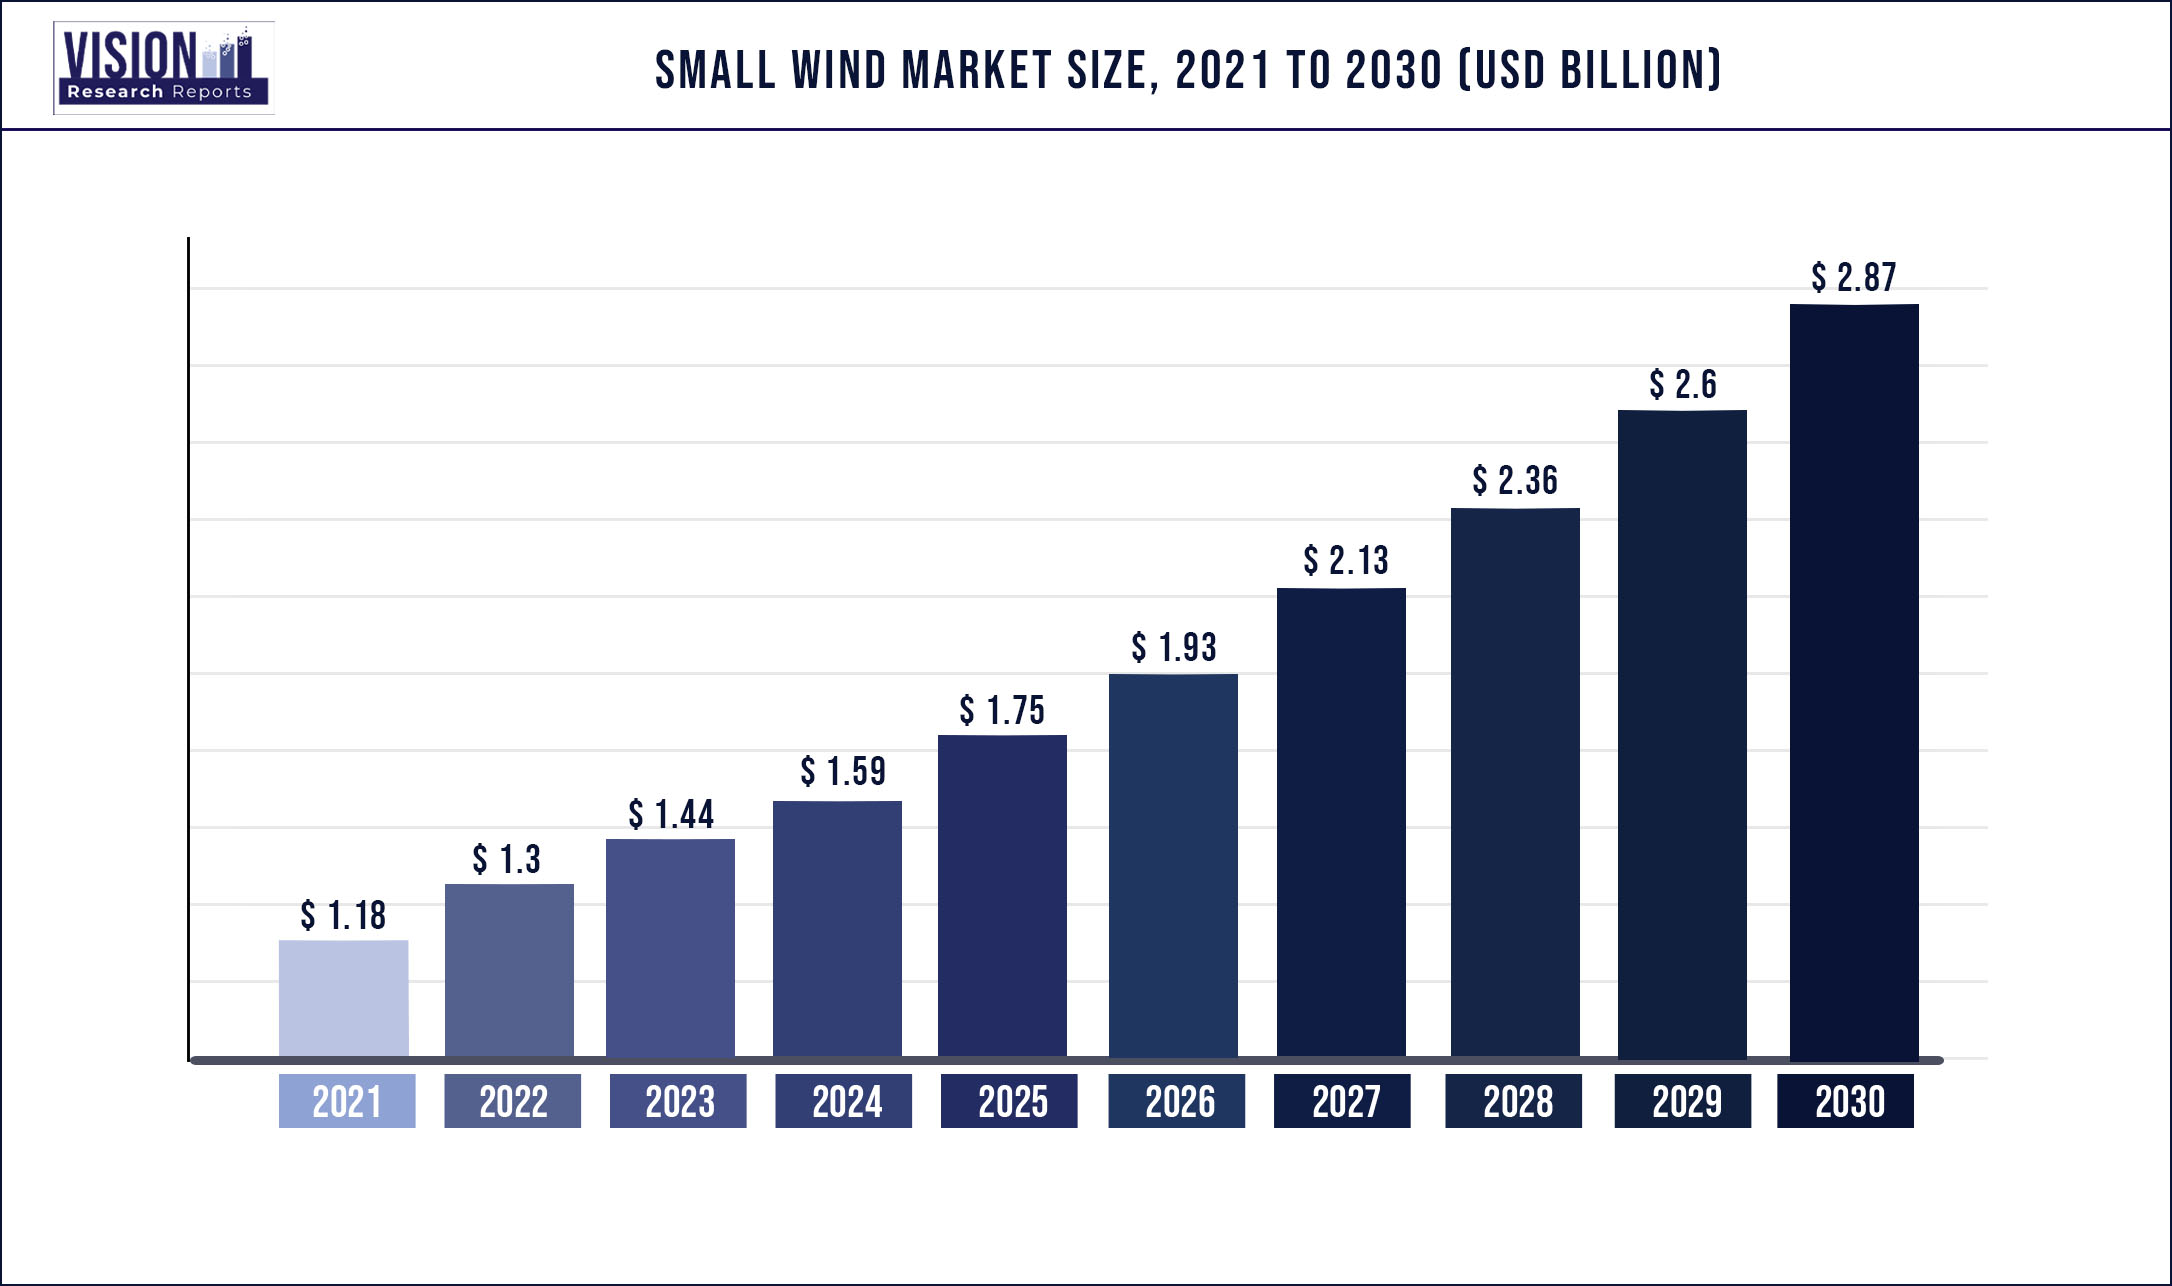 Small Wind Market Size 2021 to 2030